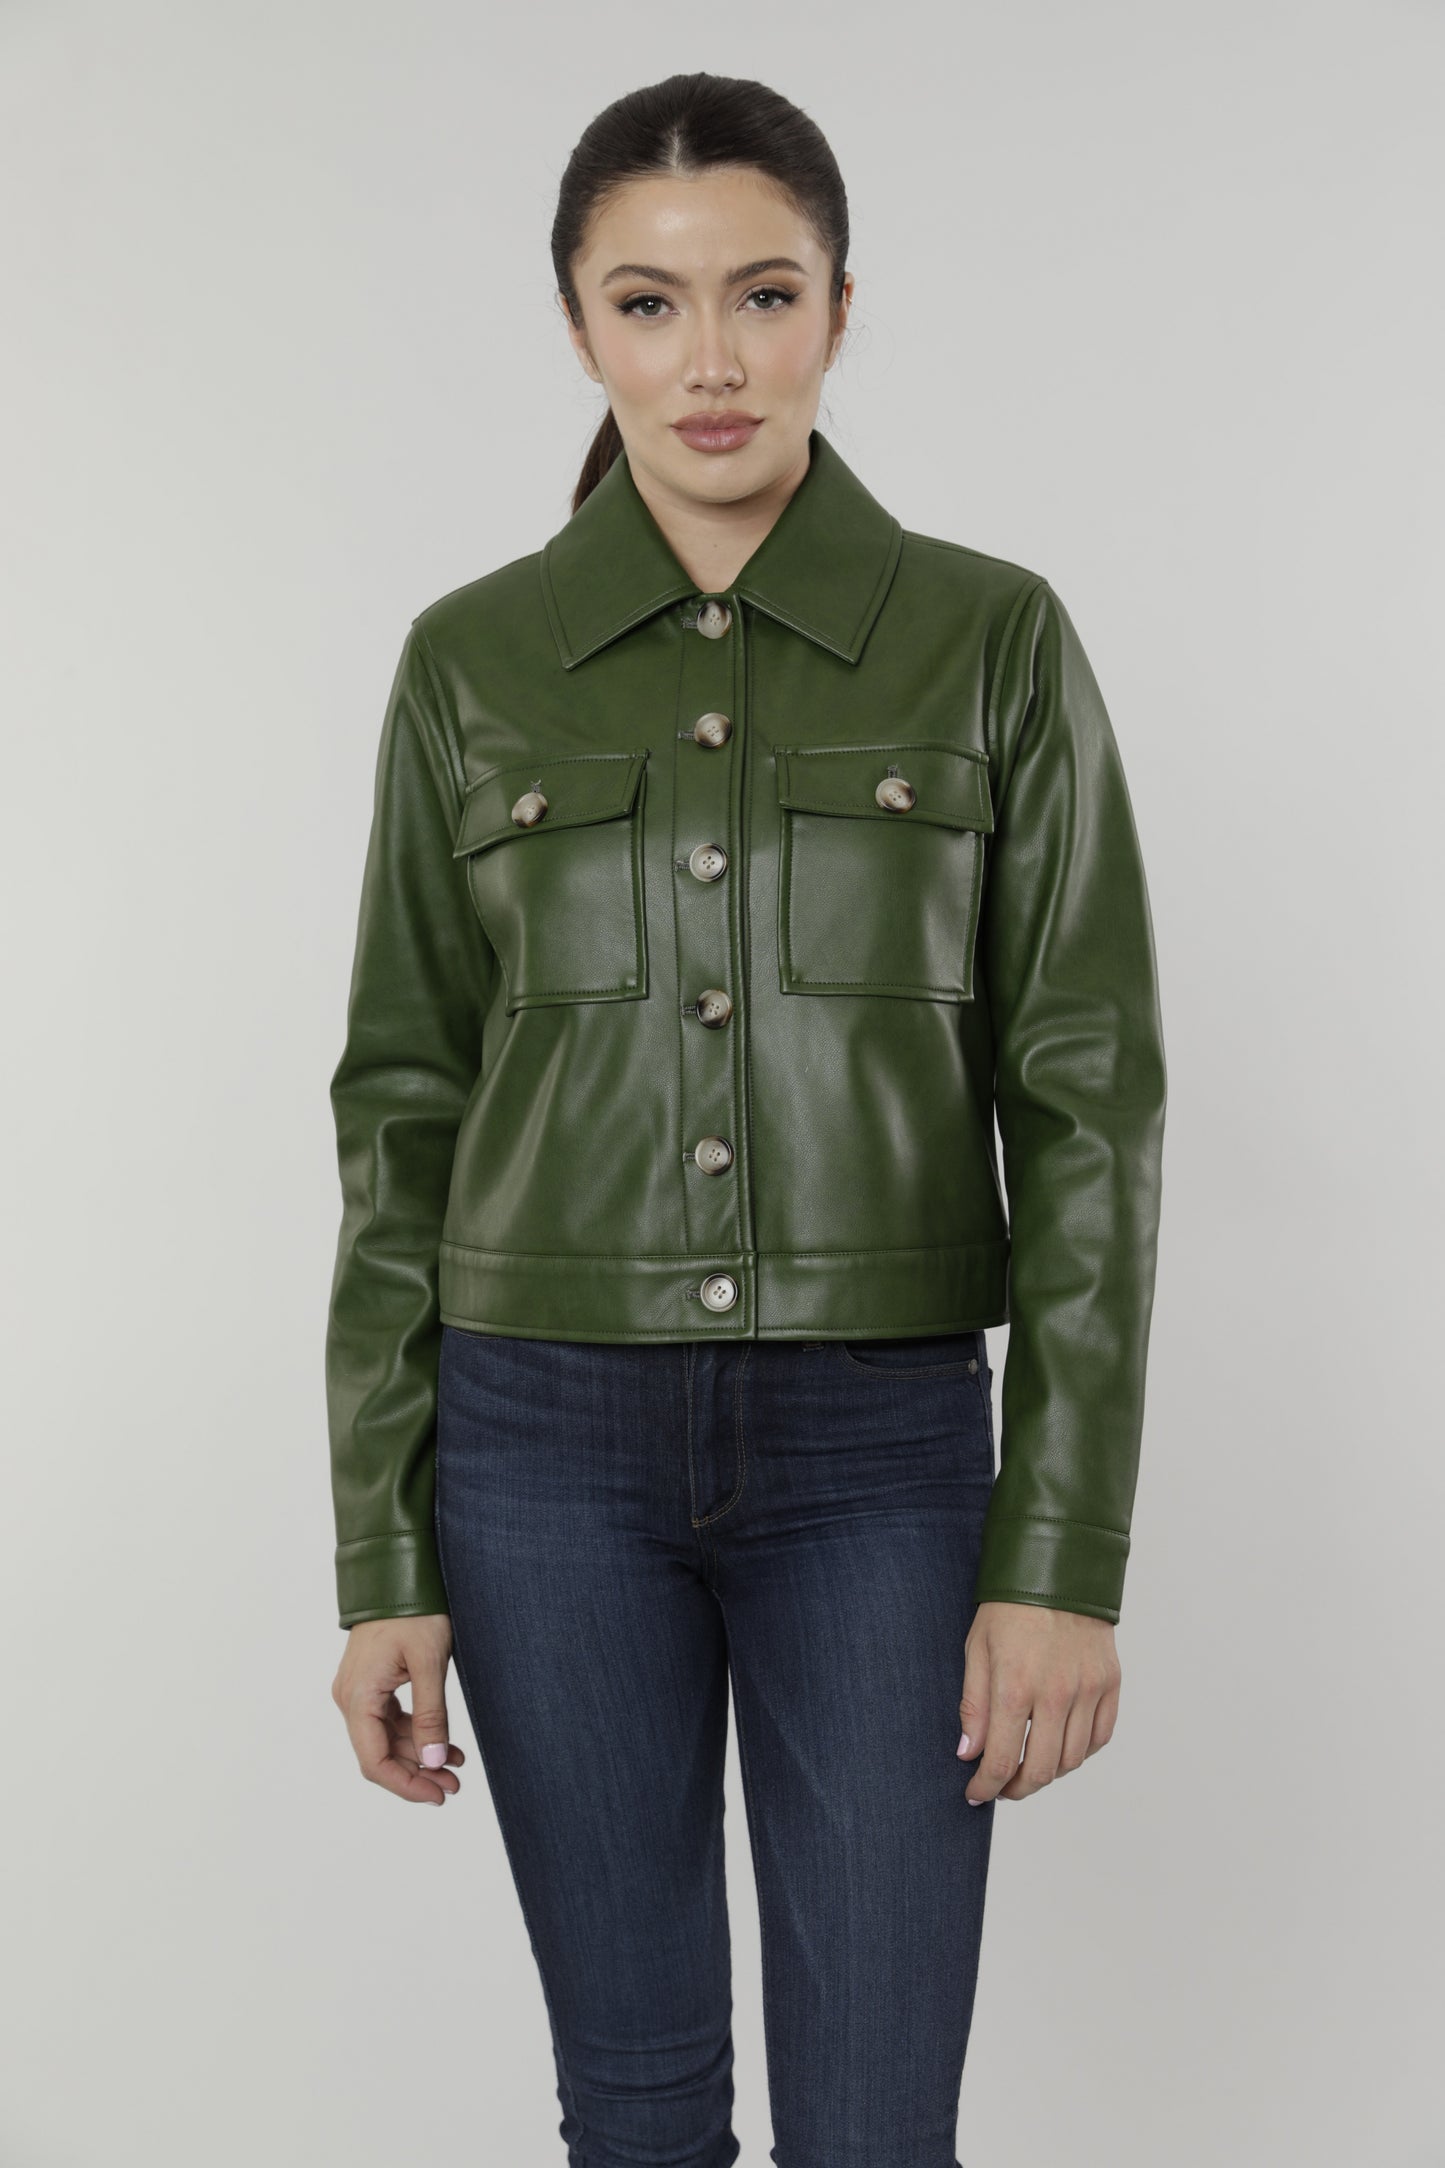 Simplee Casual Faux Leather Jacket Women Fashion Green Motorcycle Pocket  Female Leather Coat High Street Short Ladies Jackets 201023 From Bai04,  $23.93 | DHgate.Com